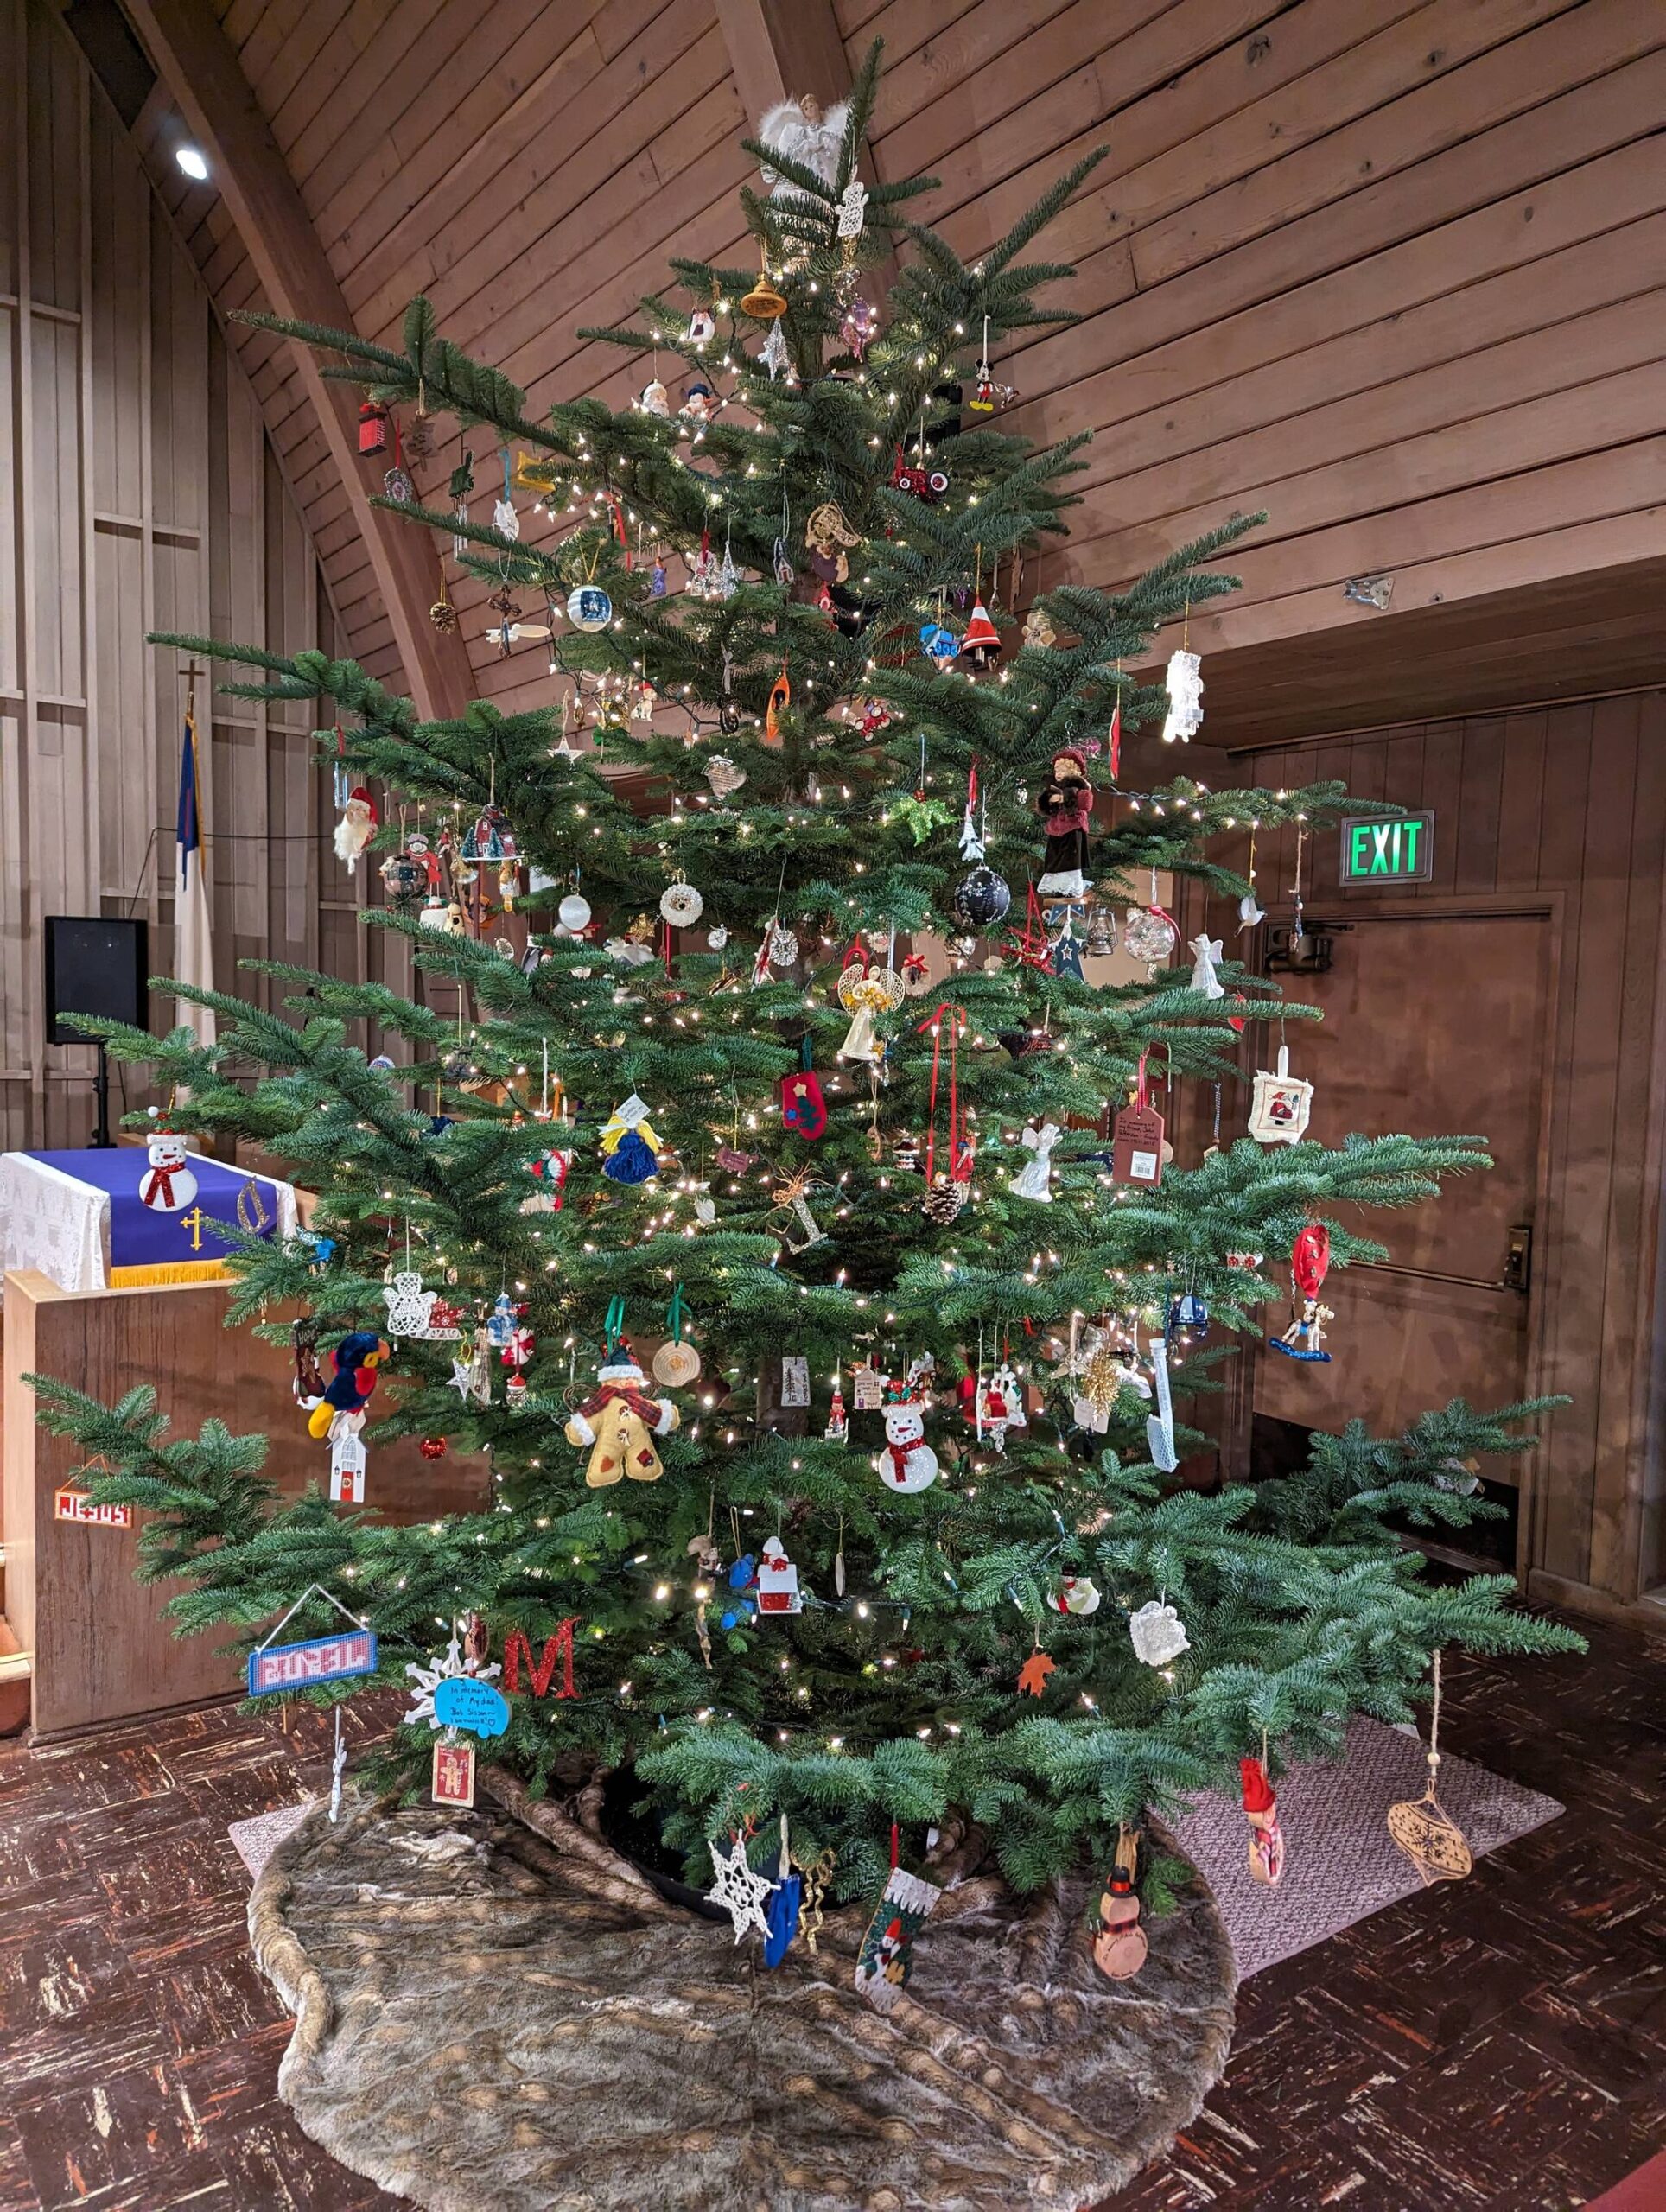 The Memory Tree at the Forks Congregational Church is up and decorated with over 300 ornaments that pay tribute to loved ones and community members who have passed on. Submitted photo